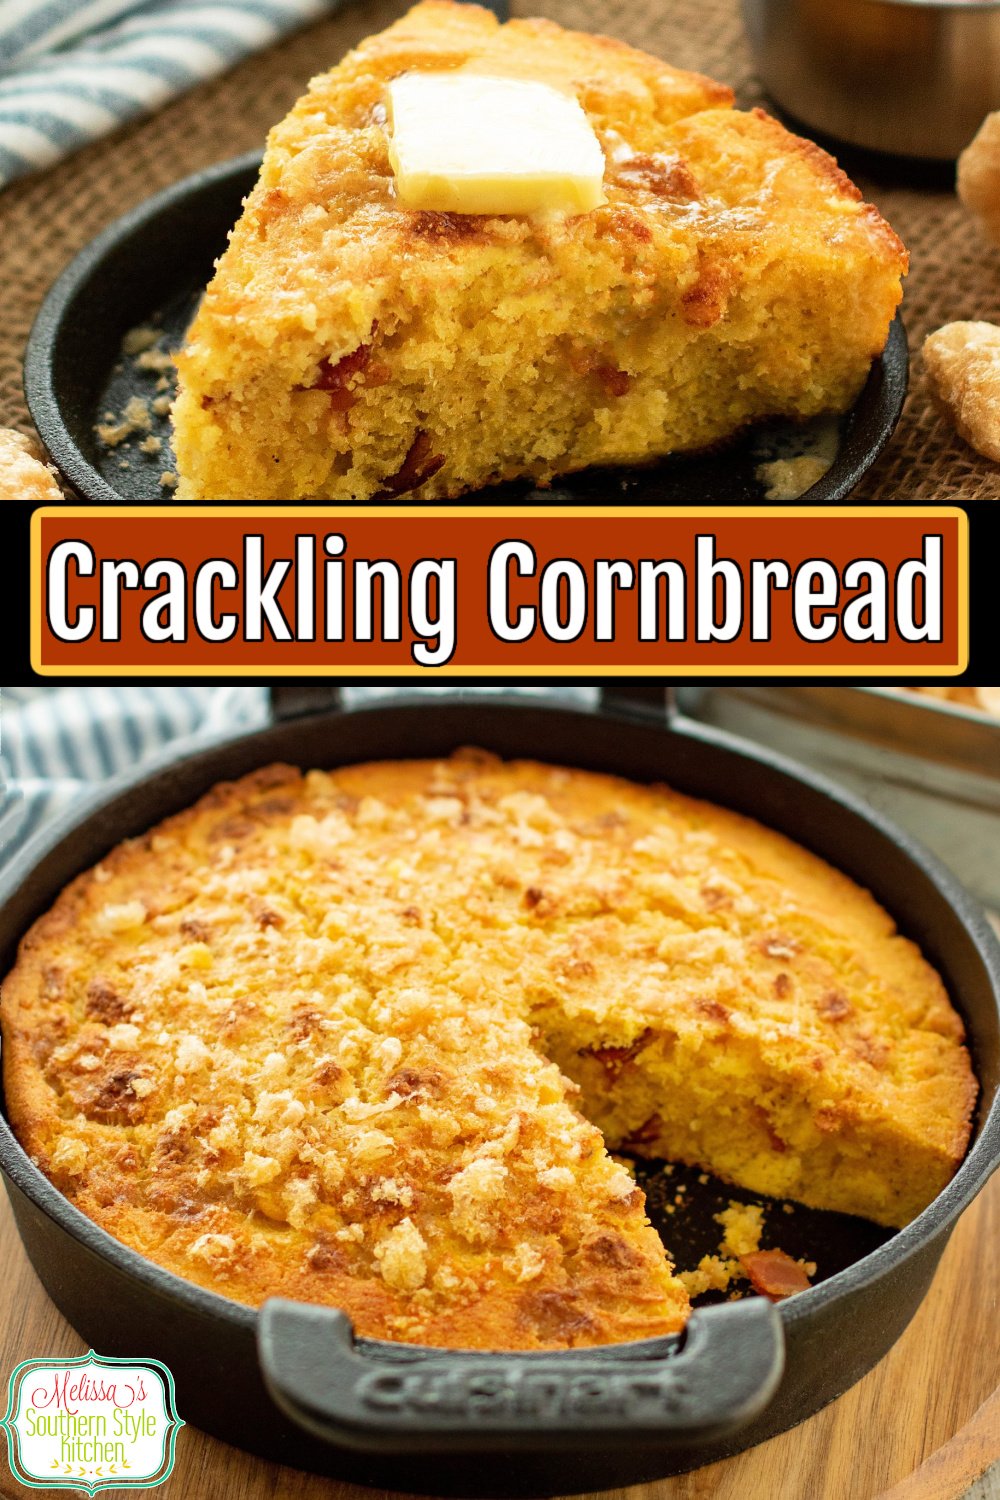 This homemade Crackling Cornbread recipe is embellished with chopped pork cracklins' and smoky bacon to give it another level of flavor. #cornbread #cornbreadrecipe #southerncornbread #homemadecornbread #cracklings #porkrinds #whatarecracklings #cracklingcornbread via @melissasssk